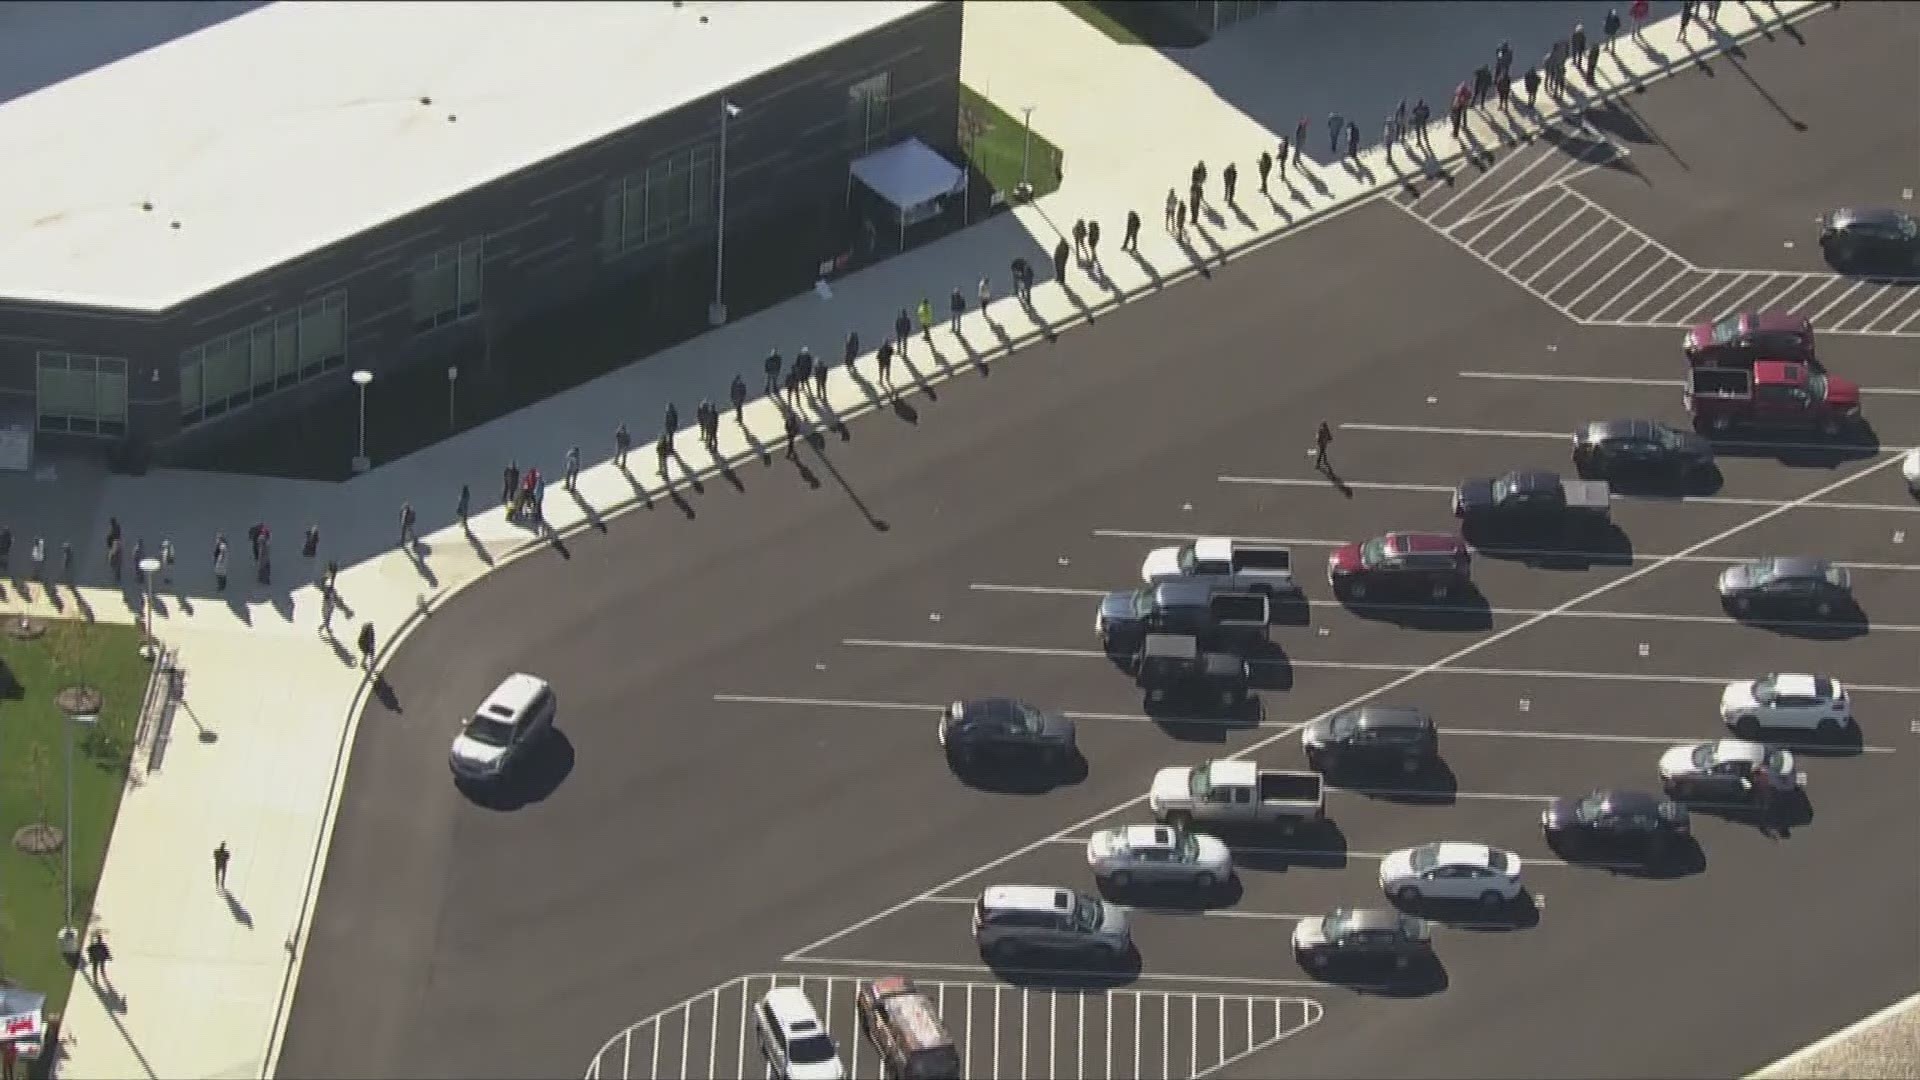 Dozens of voters waited outside of Northern High School in Calvert County, Md. to cast their ballot on Election Day.